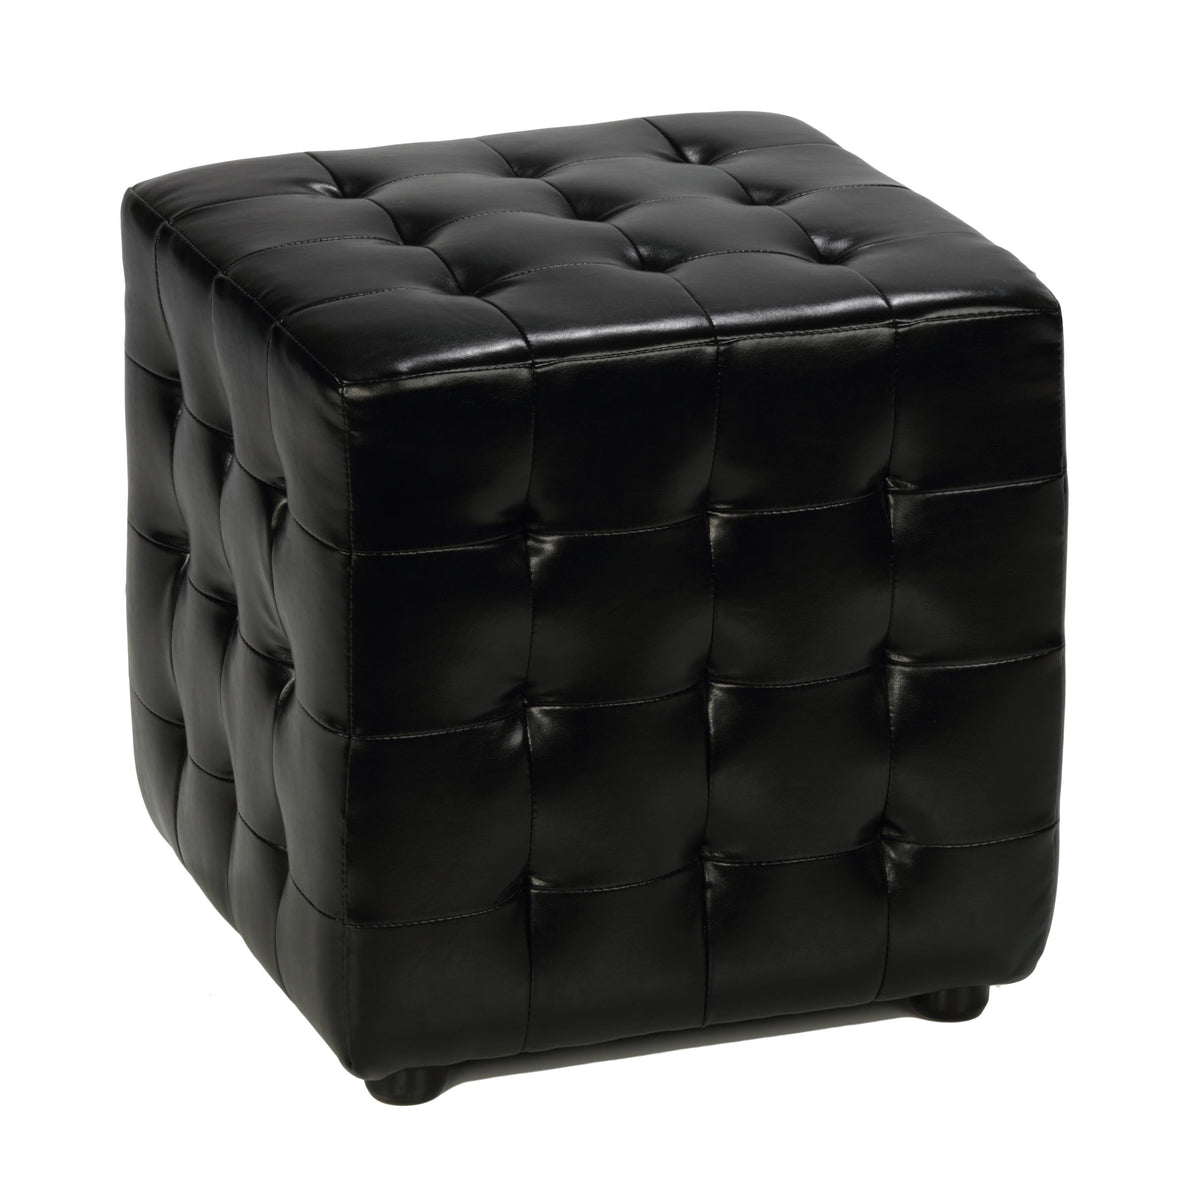 Cortesi Home Izzo Tufted Cube Ottoman in Black Bonded Leather